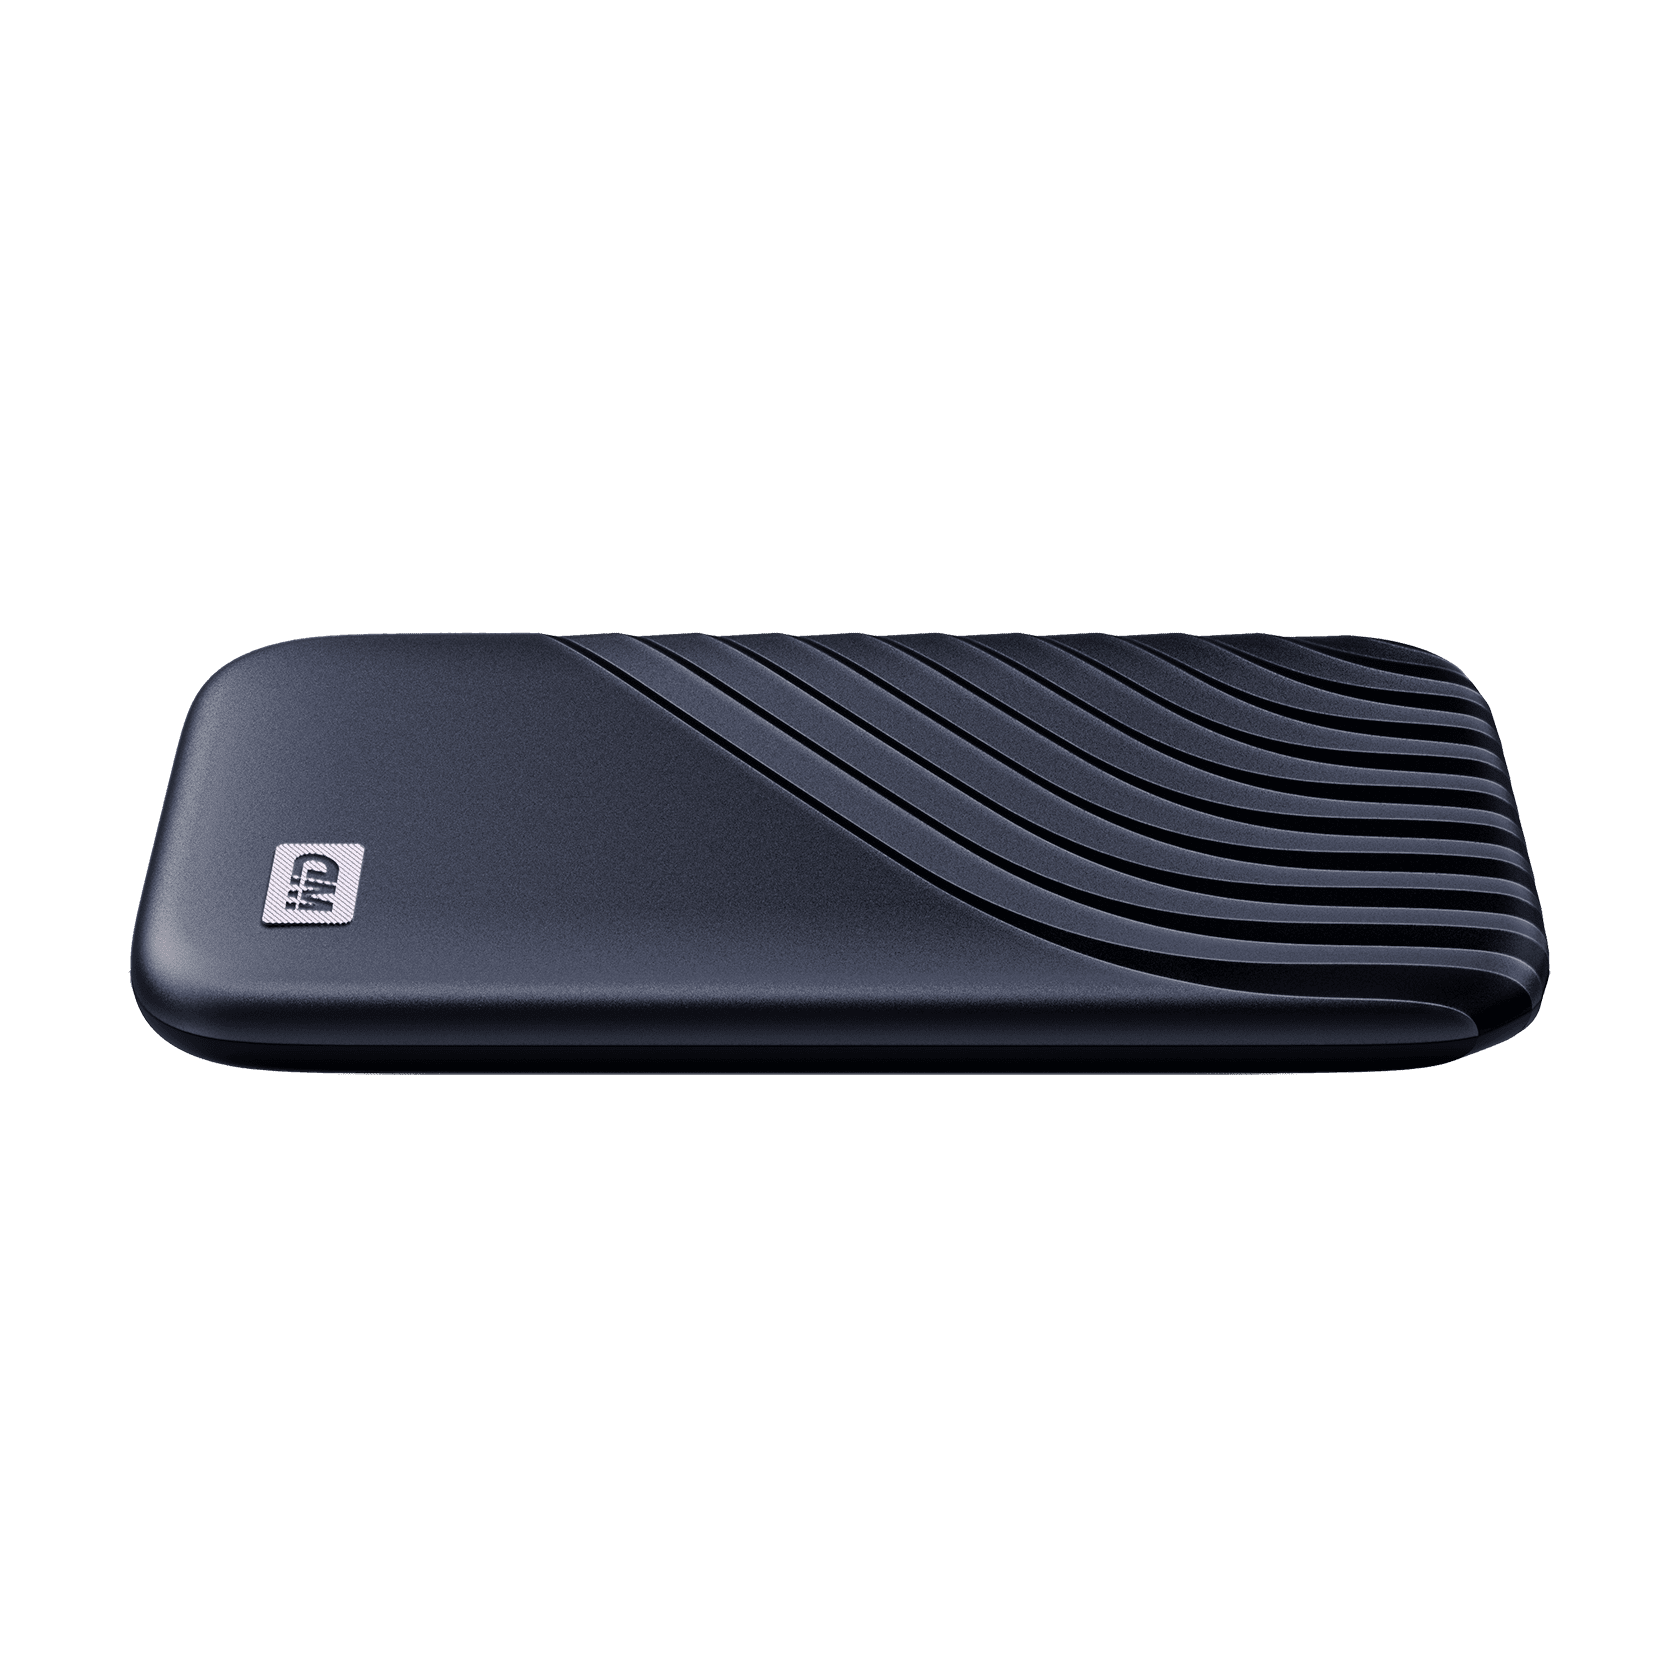 WD 4TB My Solid State Gray Passport Drive, Portable WDBAGF0040BGY-WESN - External SSD